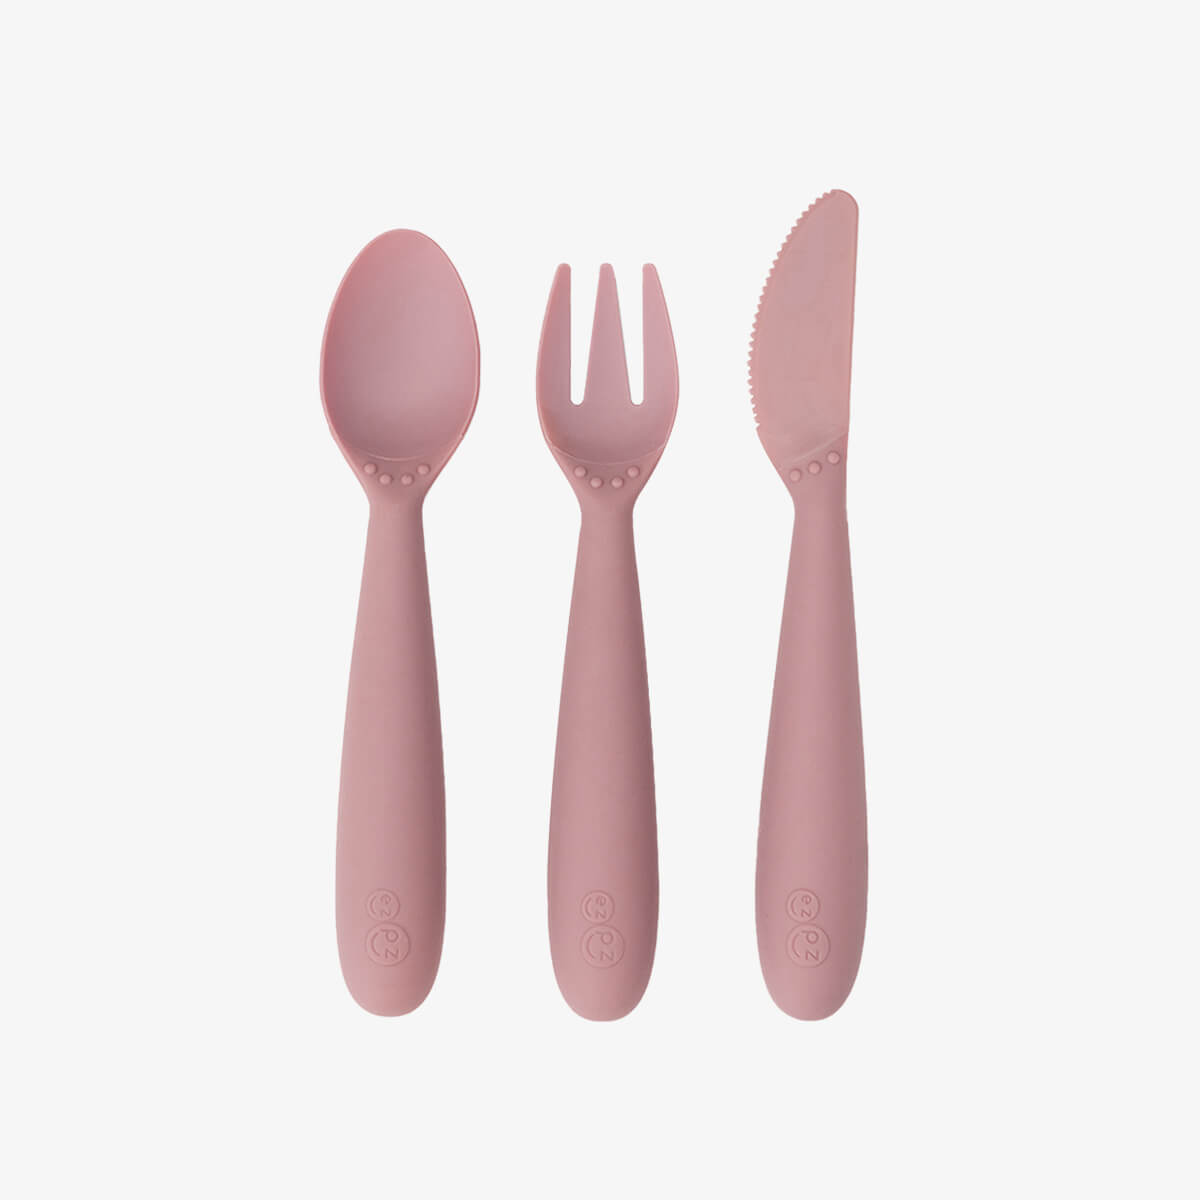 Happy Utensils in Blush by ezpz / Silicone Spoon, Fork and Knife Set for Kids